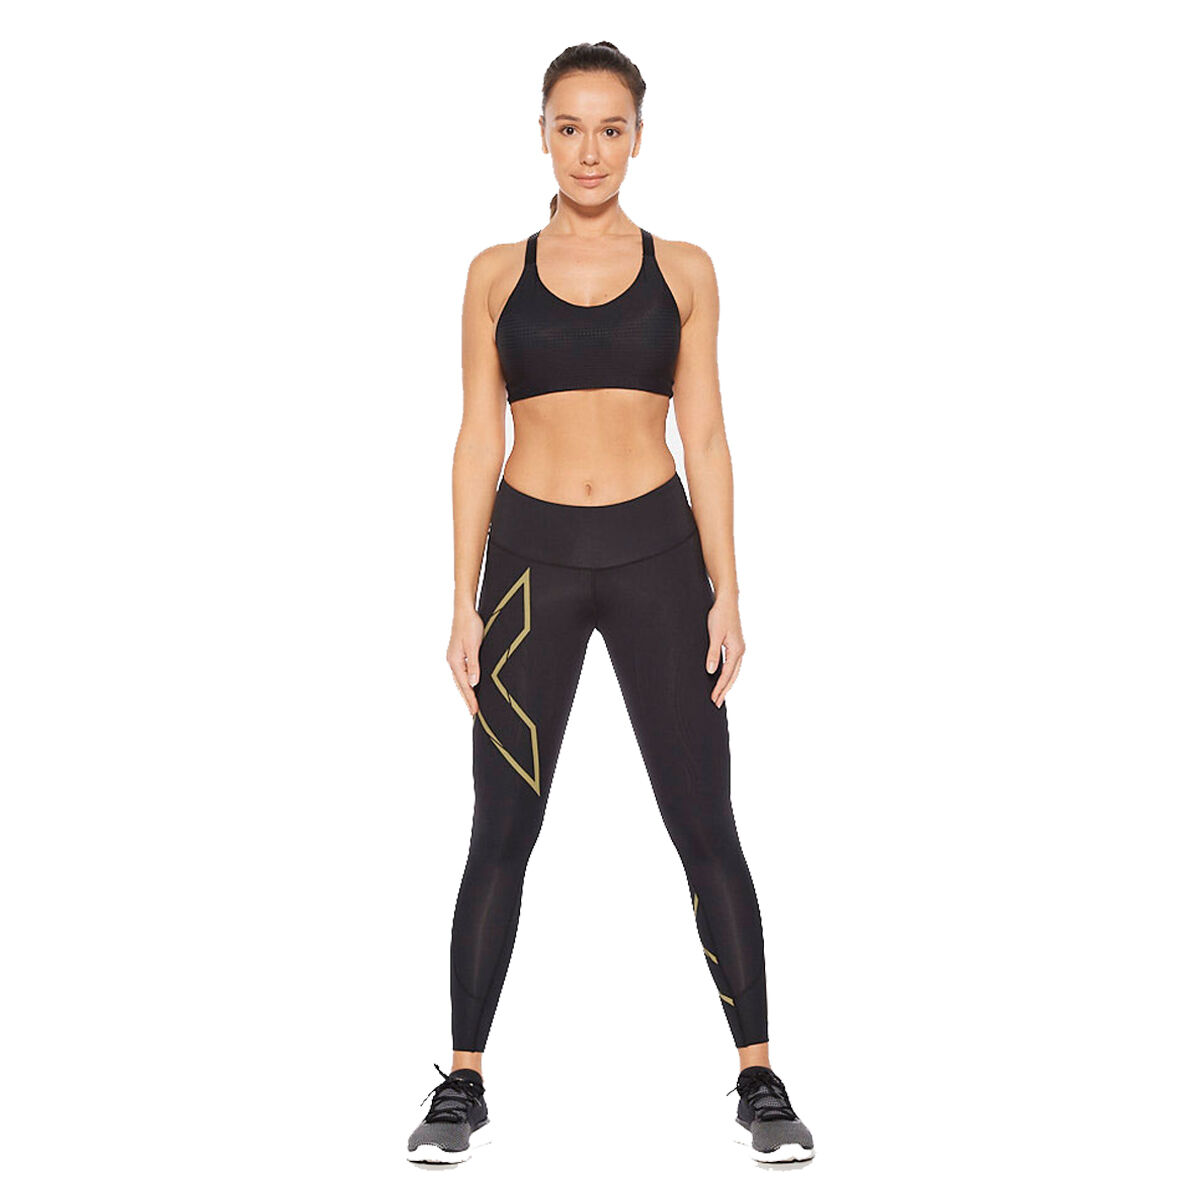 Women's Compression Clothing, Tights, Shorts & Tops